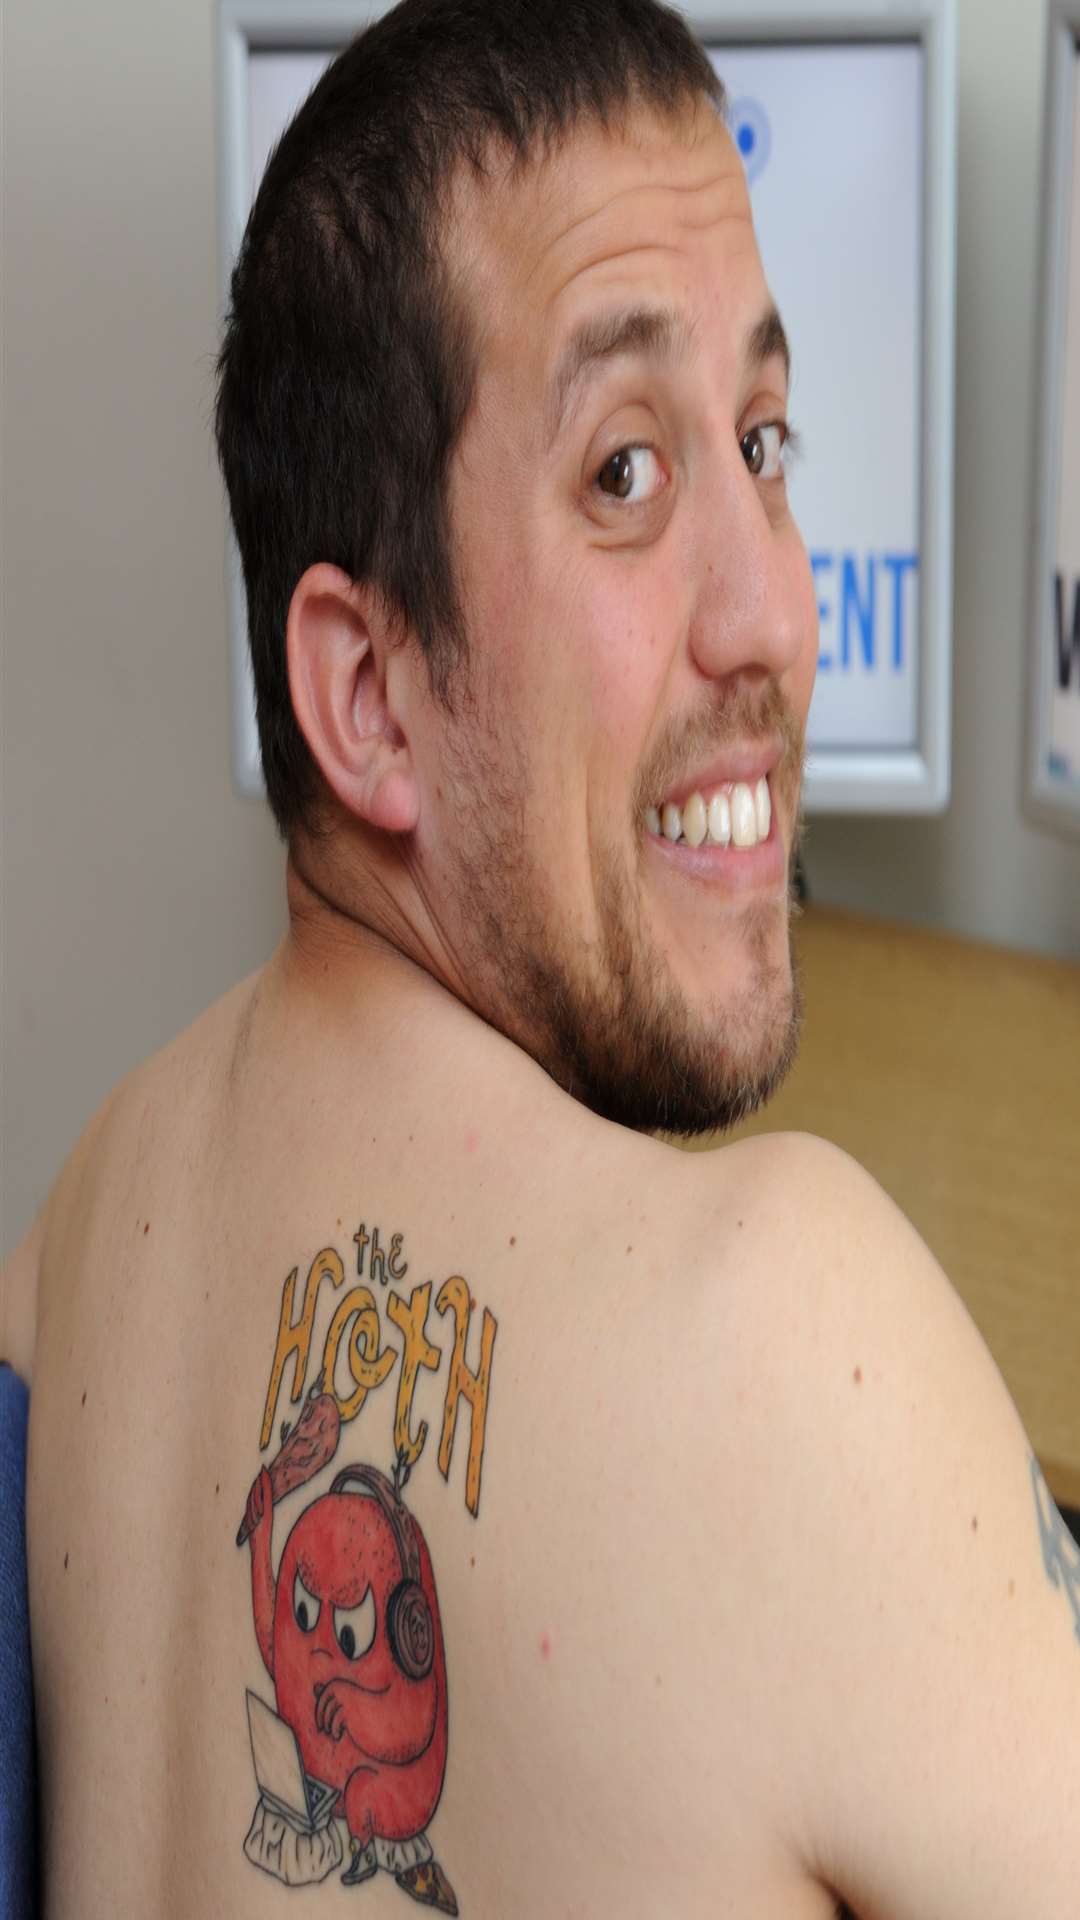 Andy Palmer and his new tattoo